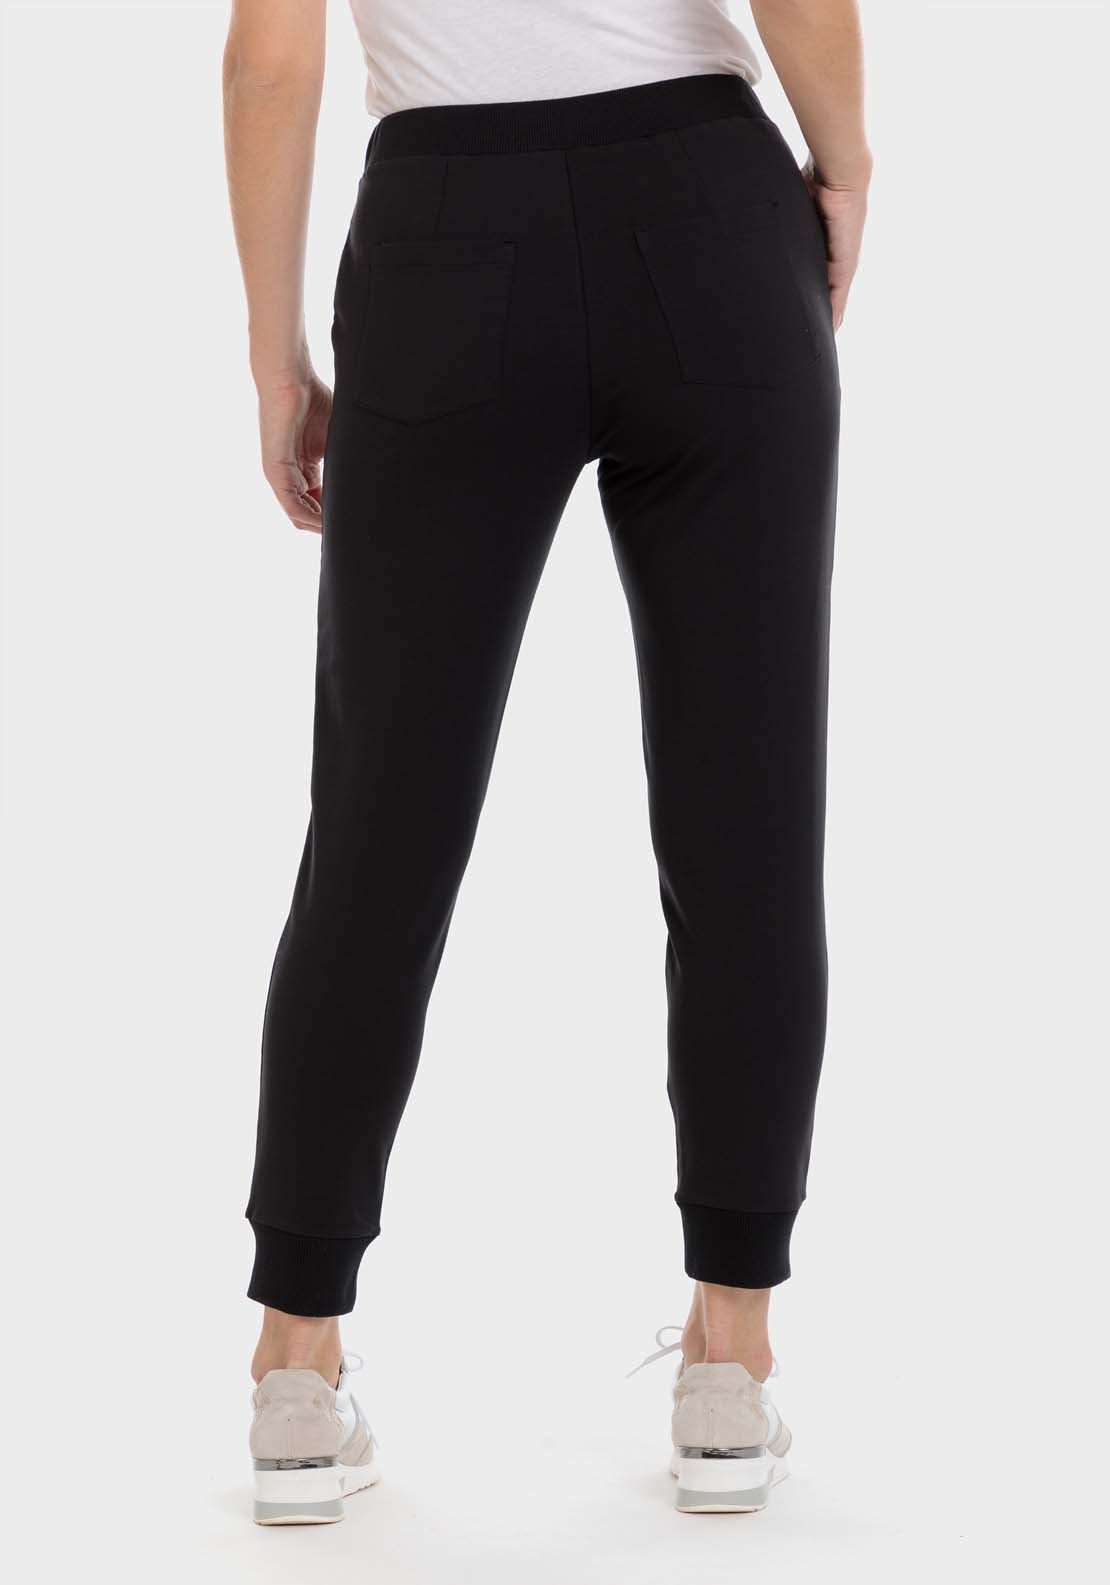 Punt Roma Black Comfy Trousers - Black 2 Shaws Department Stores